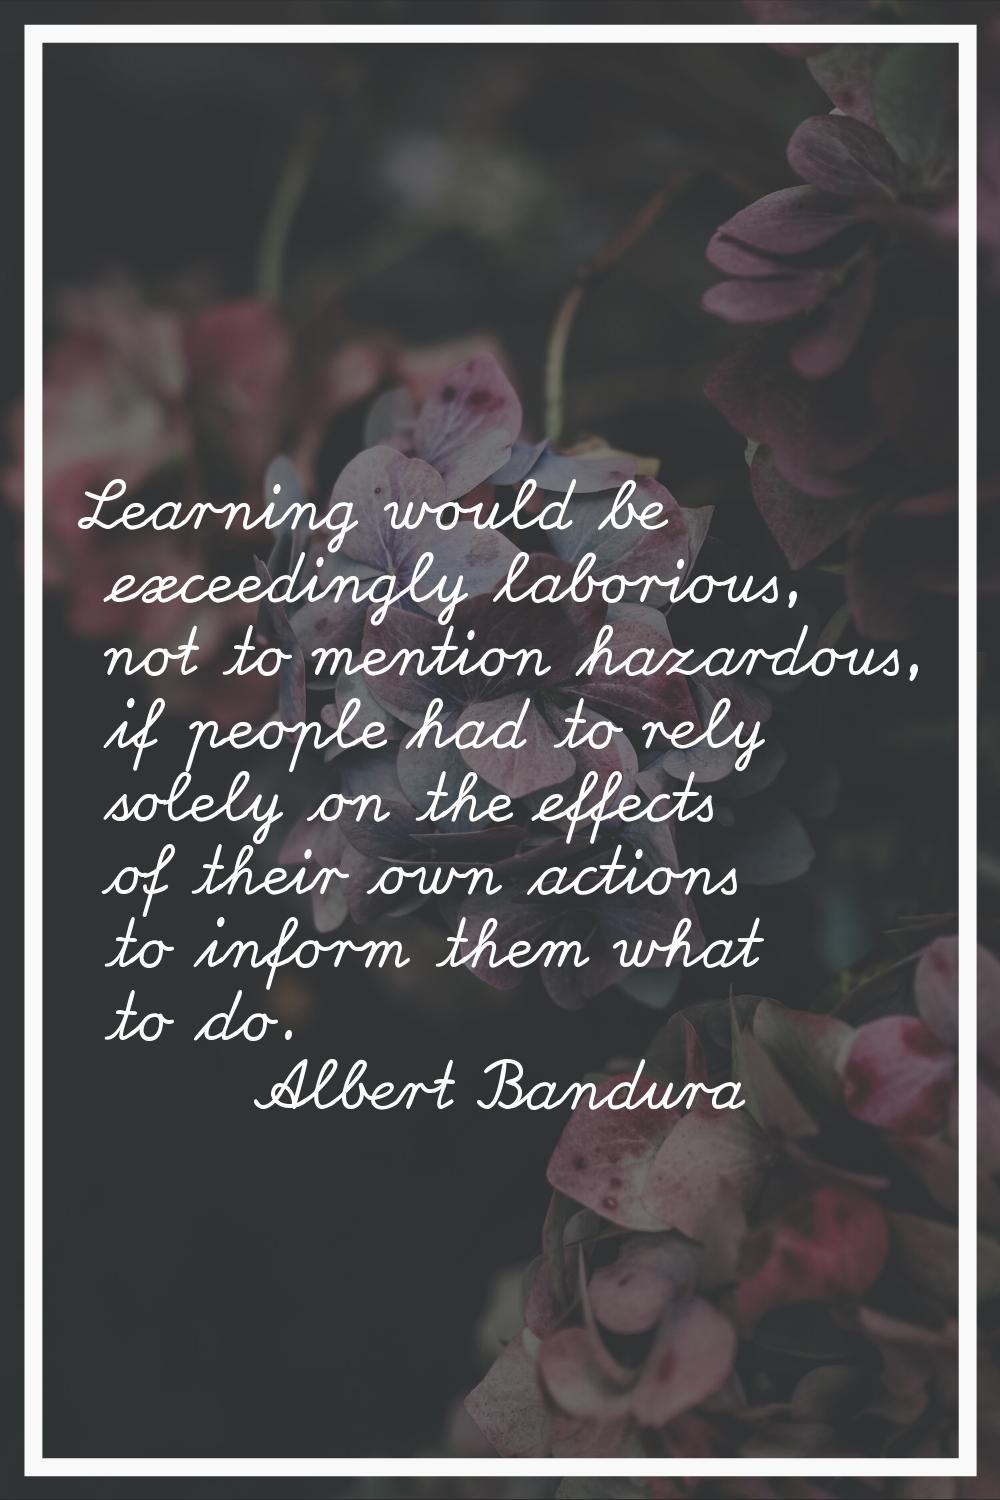 Learning would be exceedingly laborious, not to mention hazardous, if people had to rely solely on 